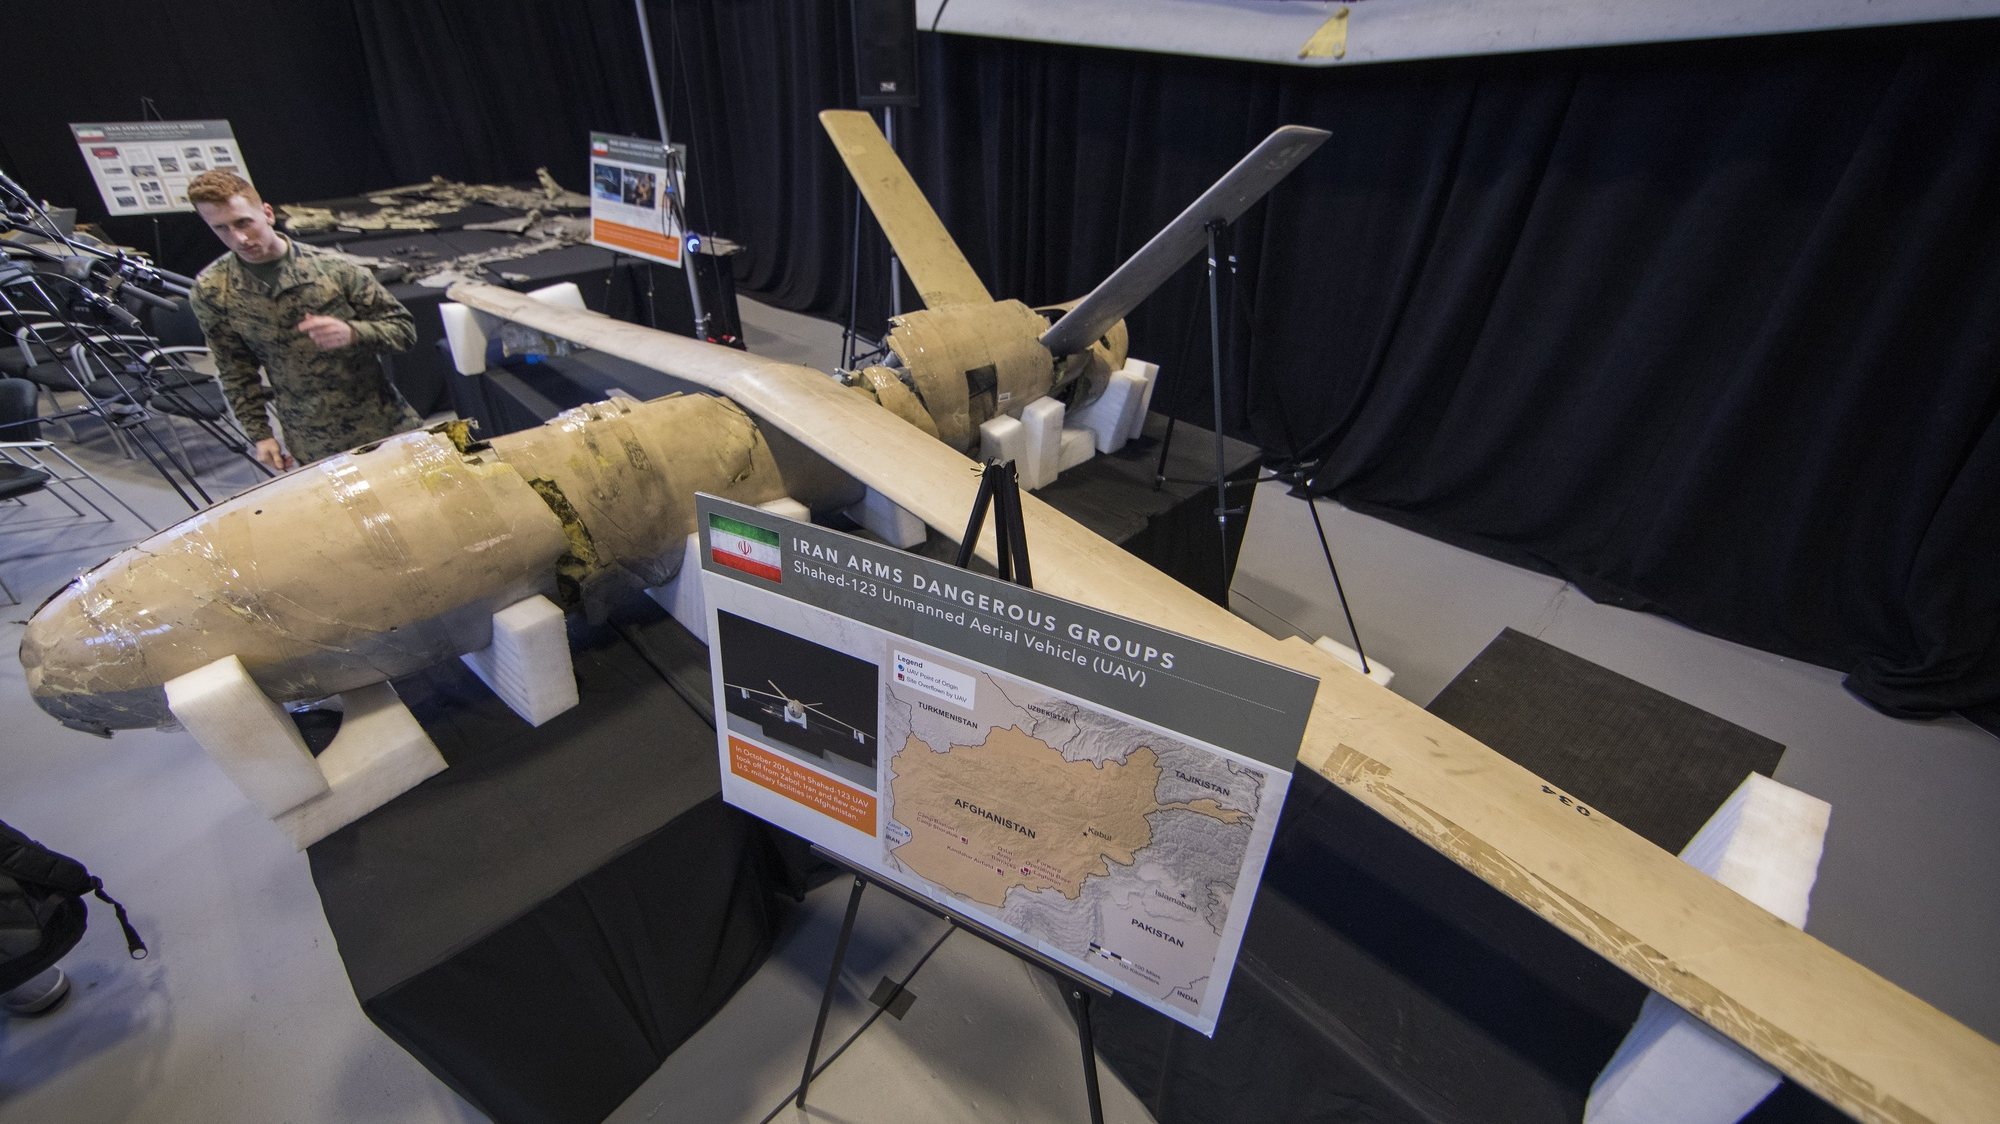 epa07197765 What is said to be a recovered Iranian Shahed-123 unmanned aerial vehicle (UAV), at an &#039;Iranian Materiel Display&#039; press conference in a hangar at Joint Base Anacostia-Bolling in Washington, DC, USA, 29 November 2018. The administration of US President Donald J. Trump is accusing Iran of arming groups with advanced weapons and sowing instability in the Middle East region.  EPA/ERIK S. LESSER